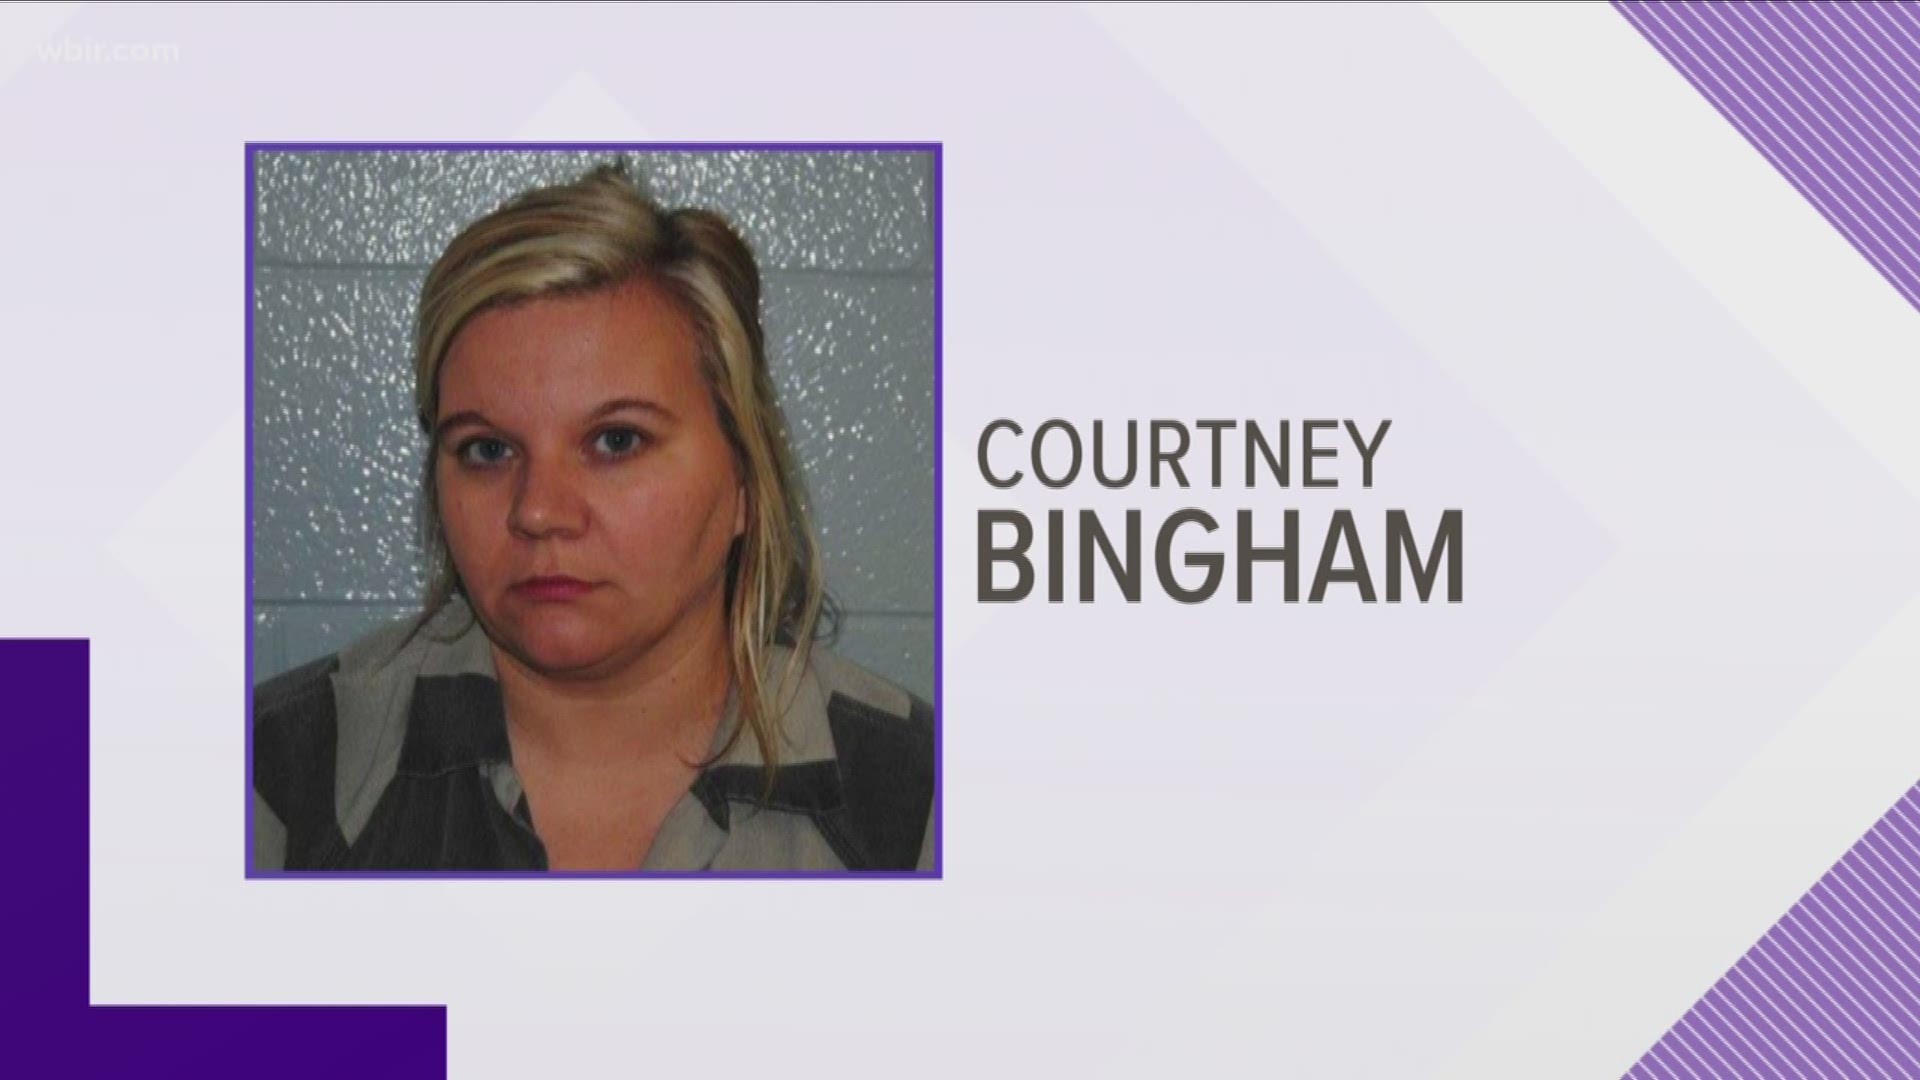 Bingham calls herself a youth leader and has been referred to by others as a youth leader, Detective Sgt. Jason Smith said.